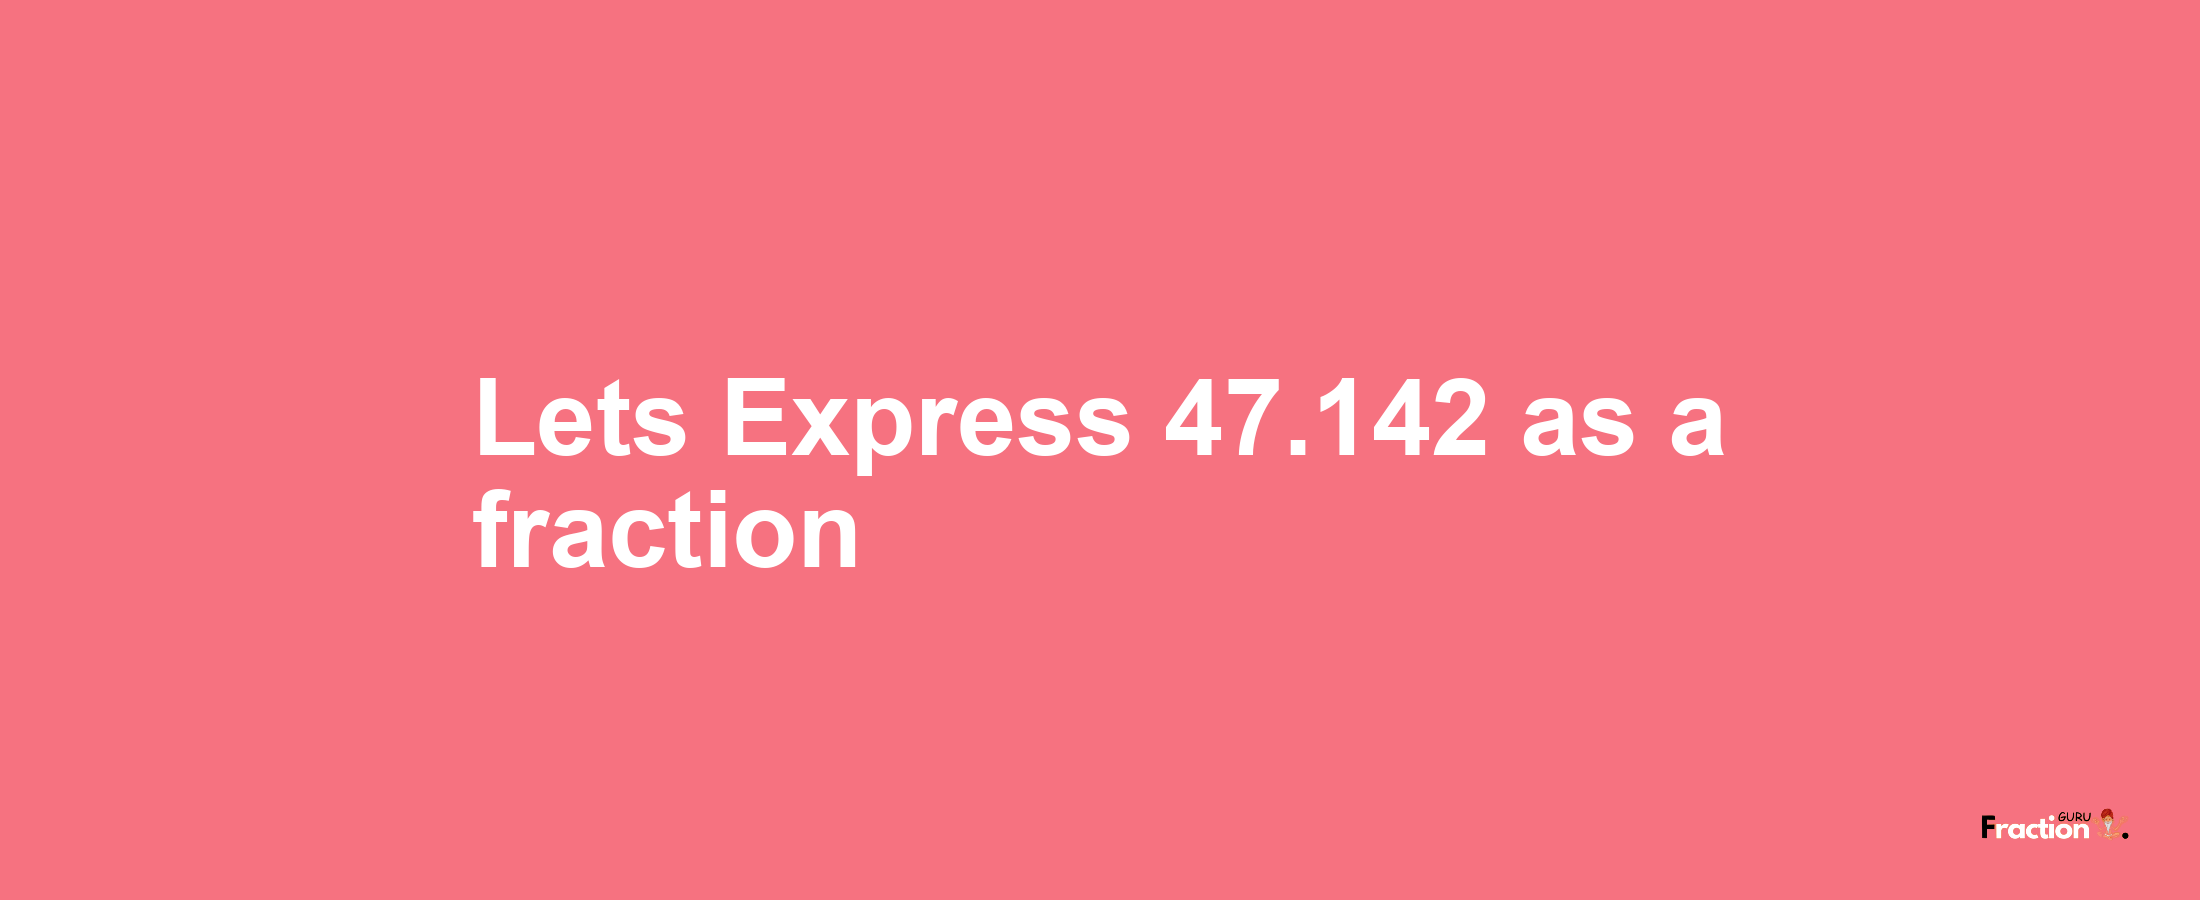 Lets Express 47.142 as afraction